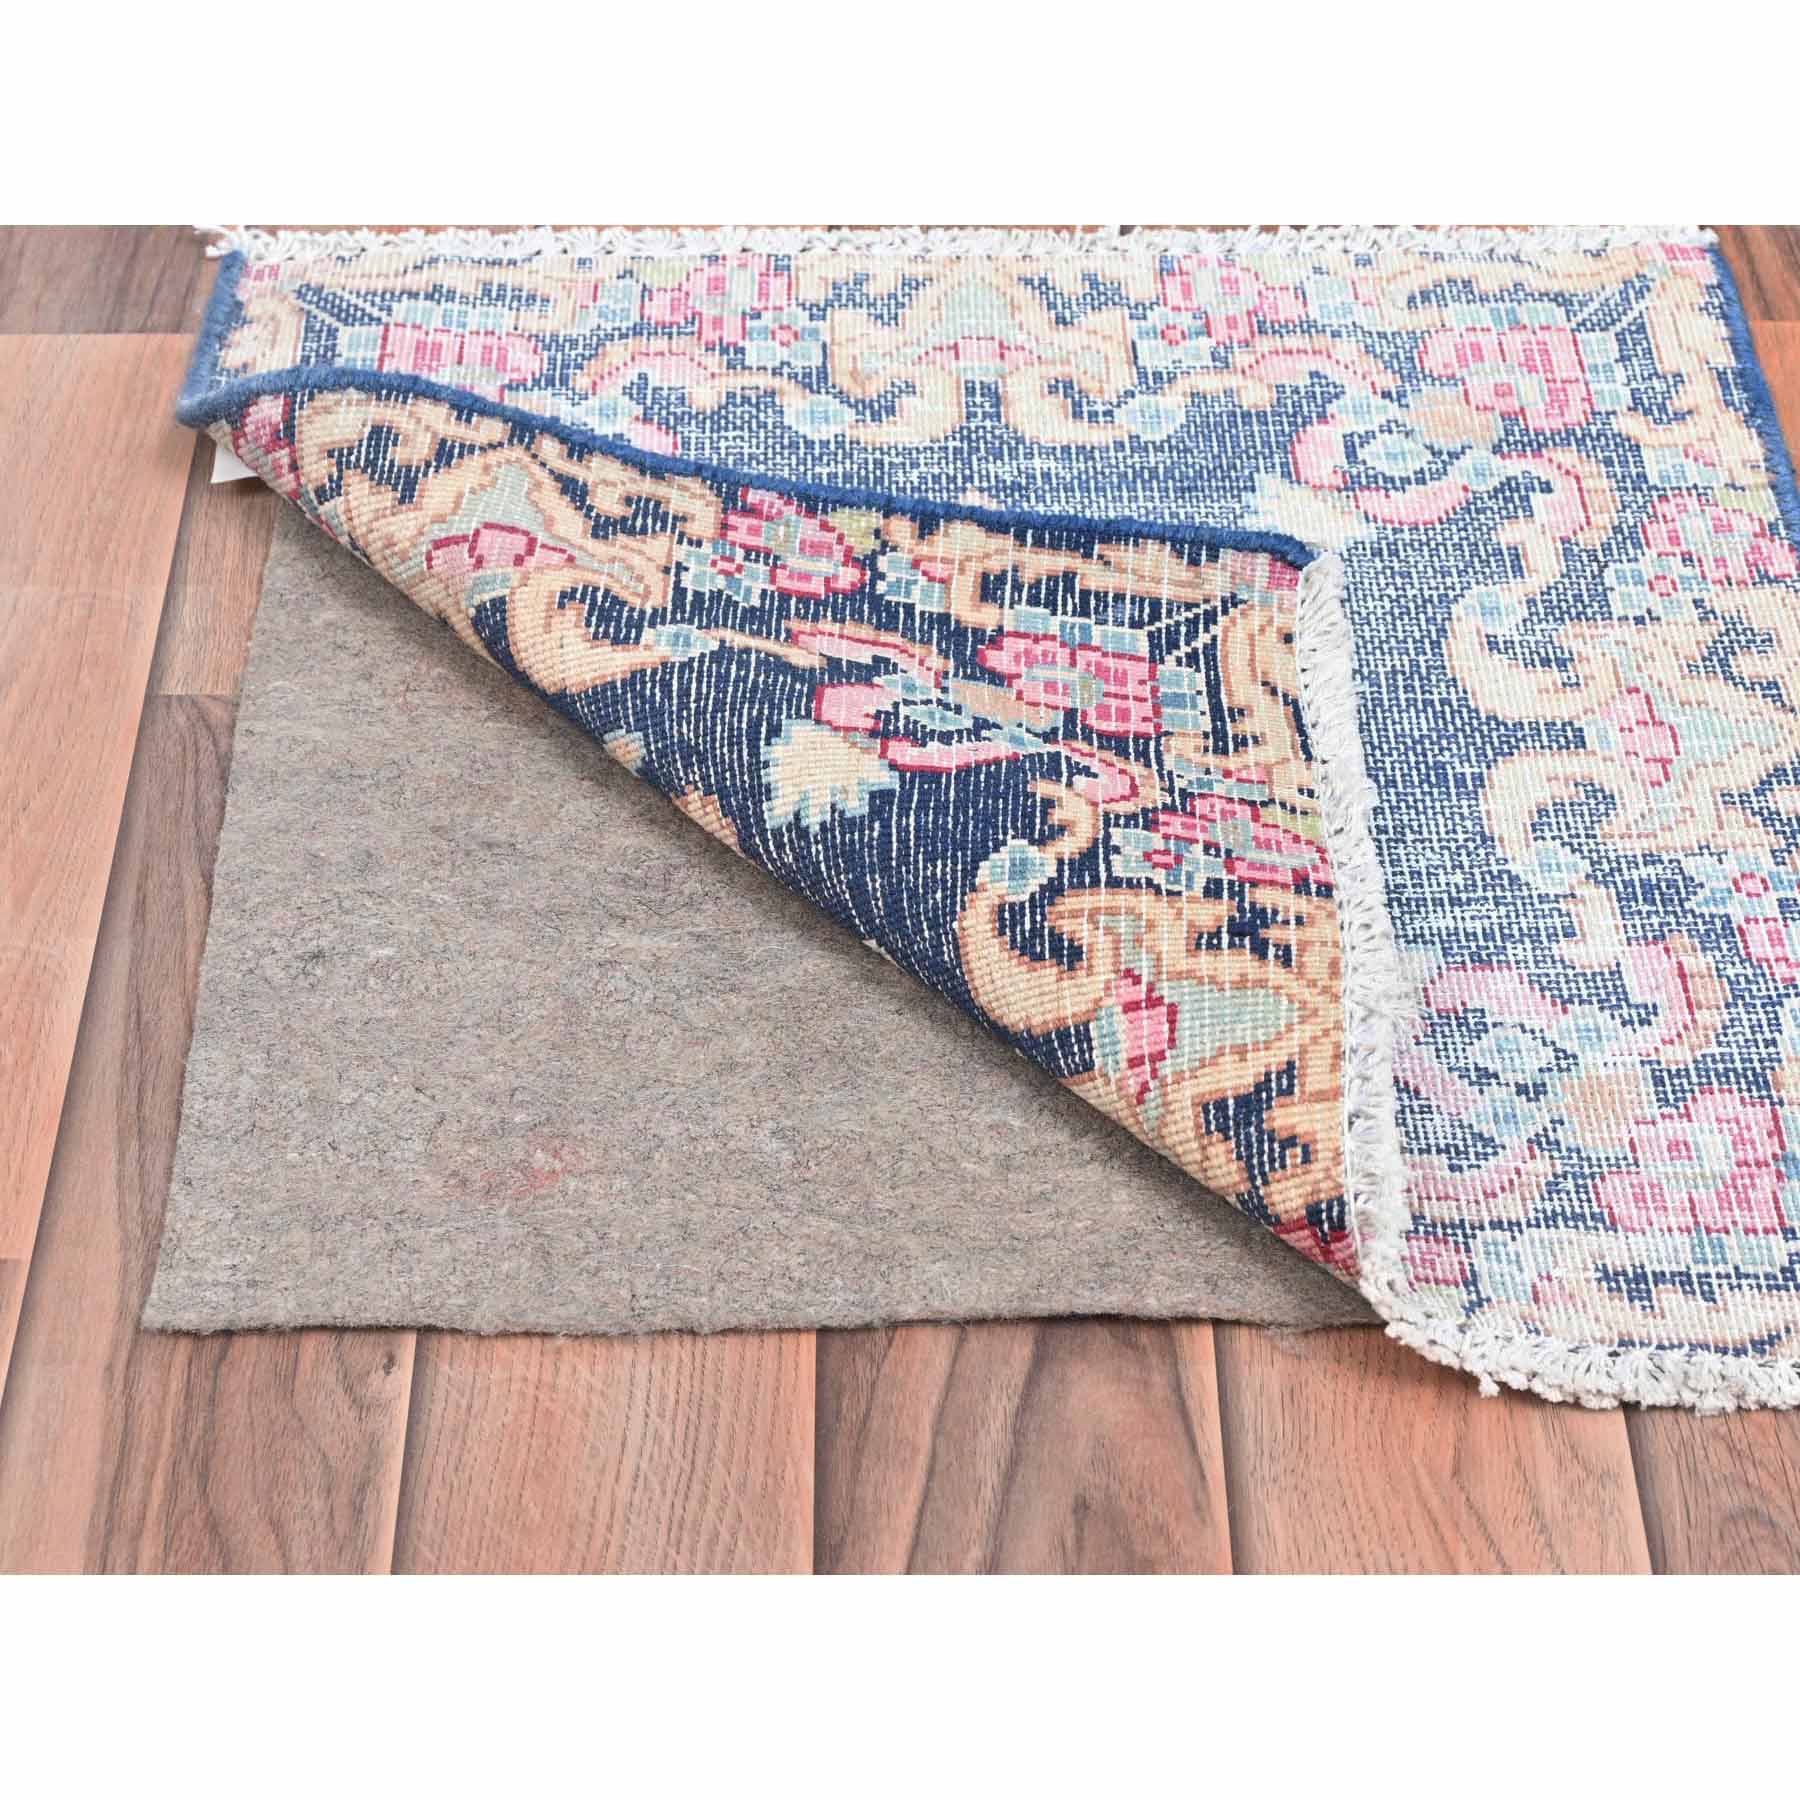 Overdyed-Vintage-Hand-Knotted-Rug-409795